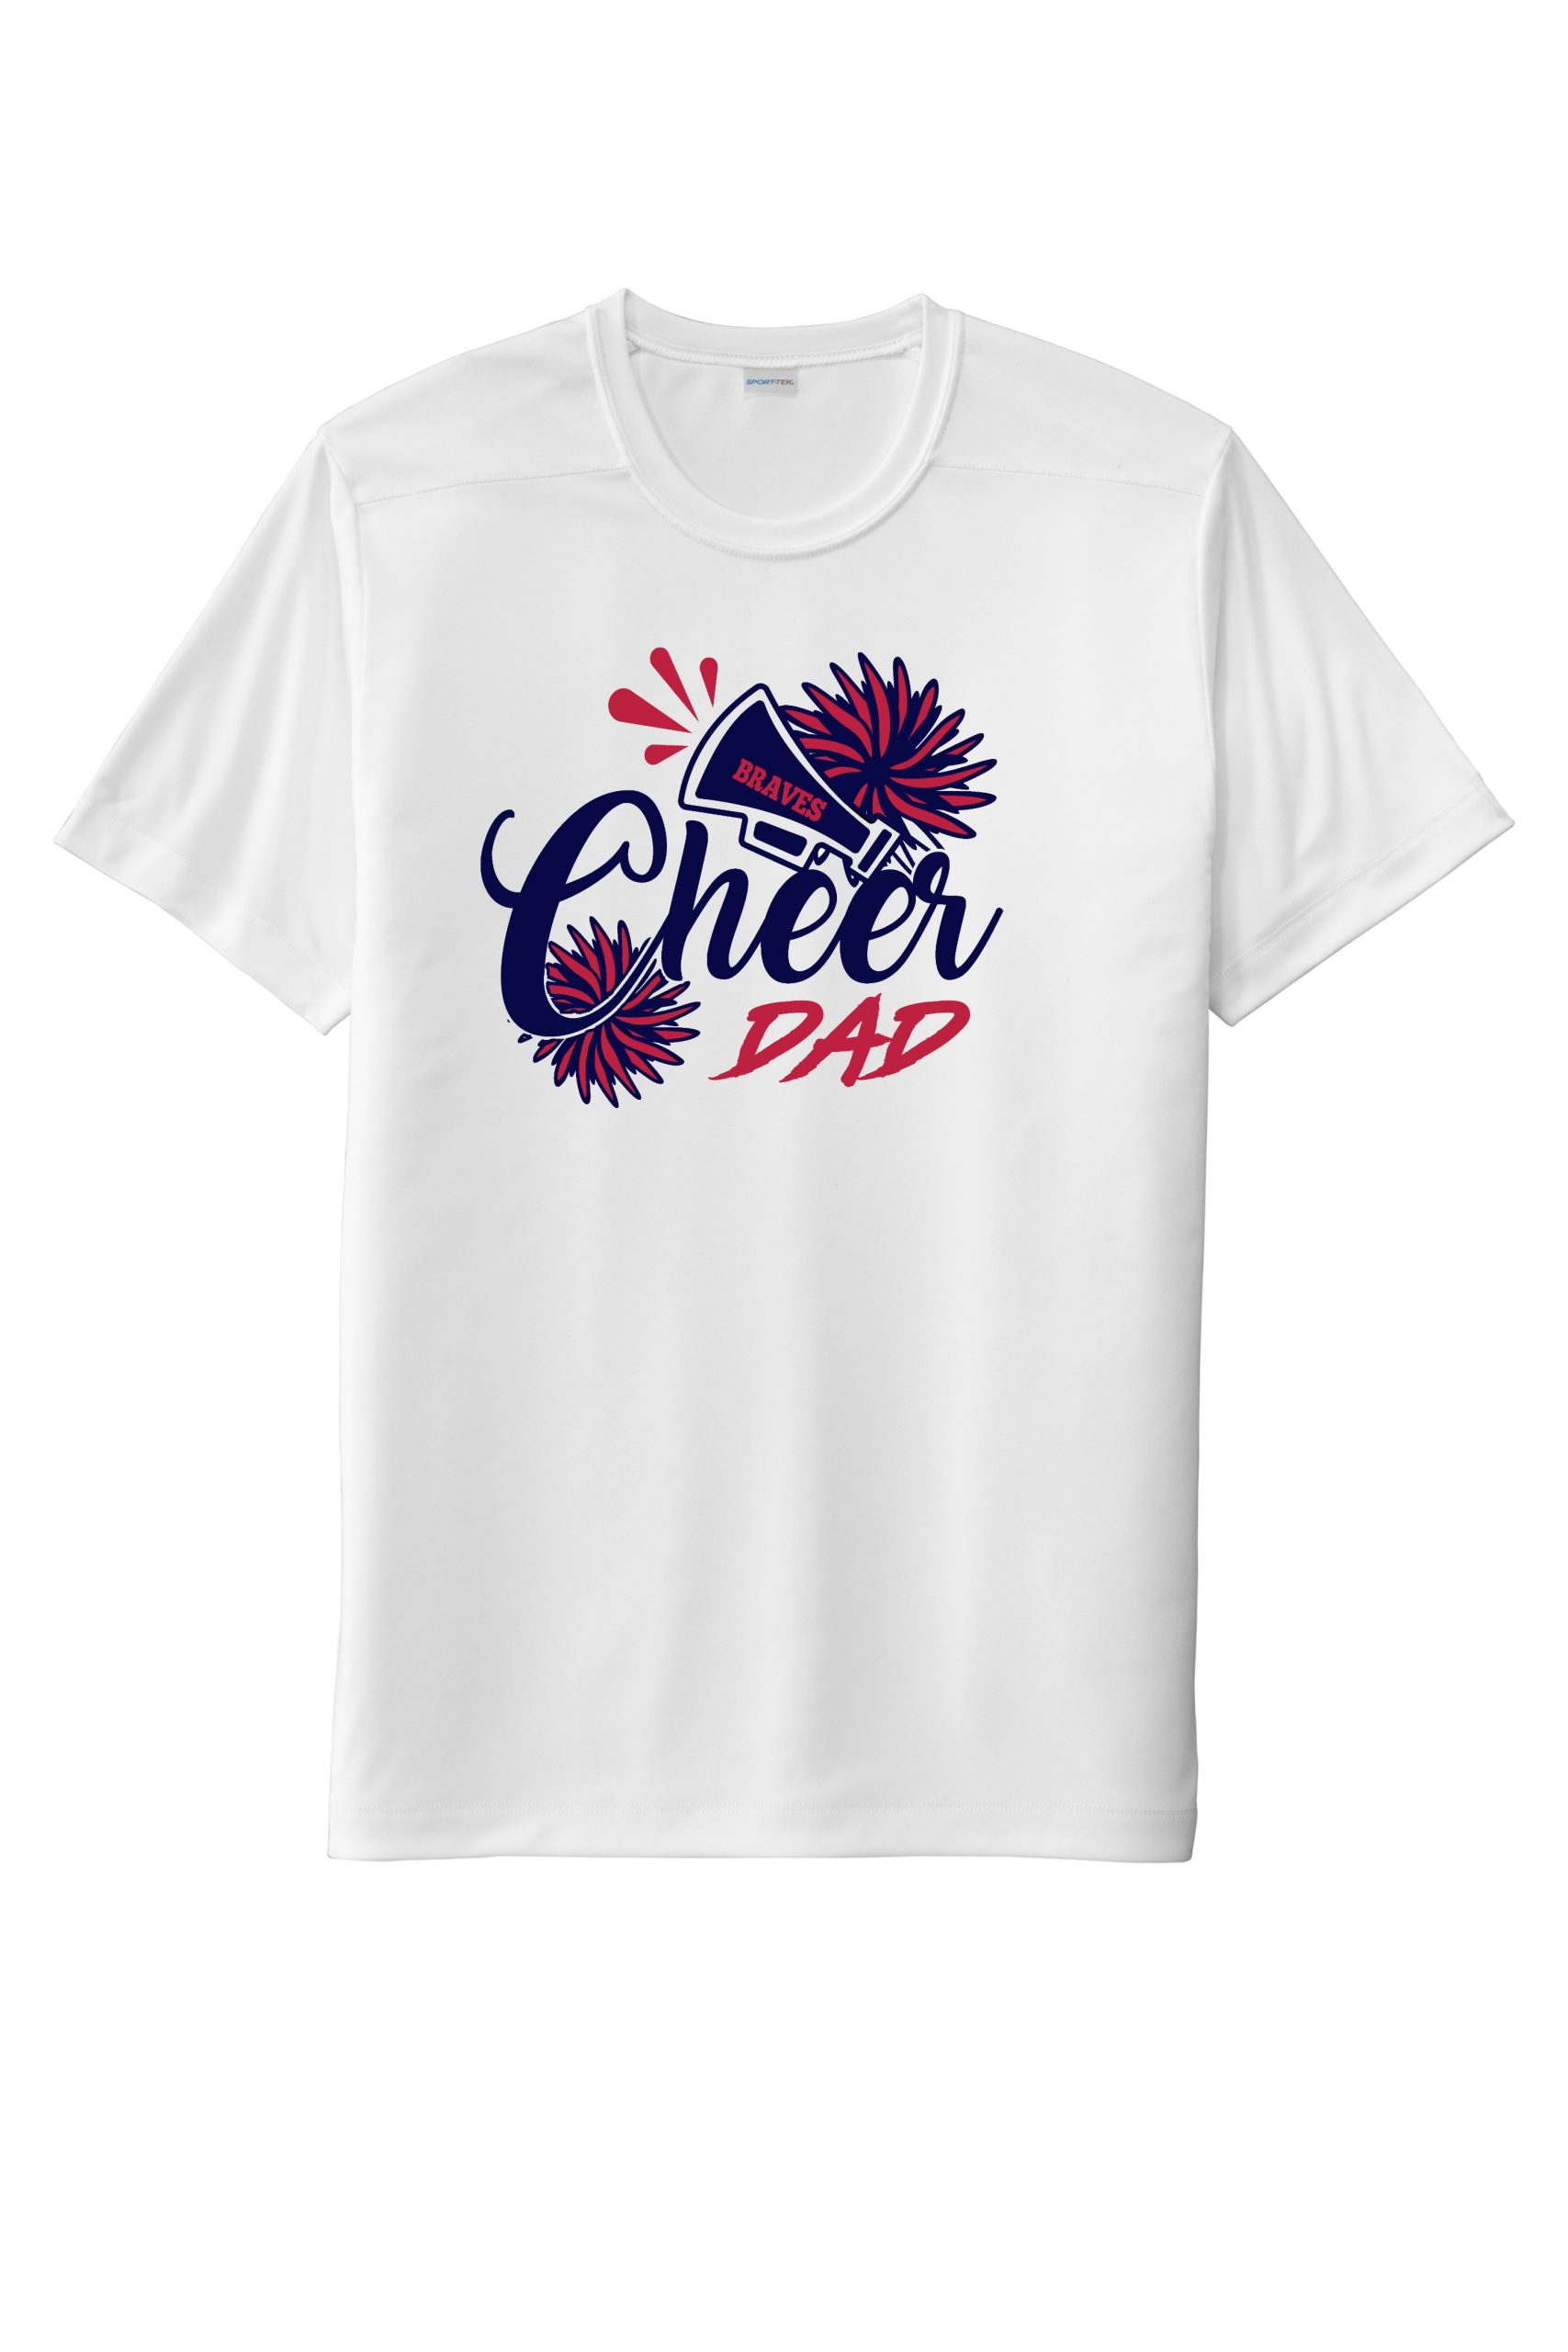 Manalapan Braves Cheer Fan Shirts (youth/adult sizes) – Scrappy